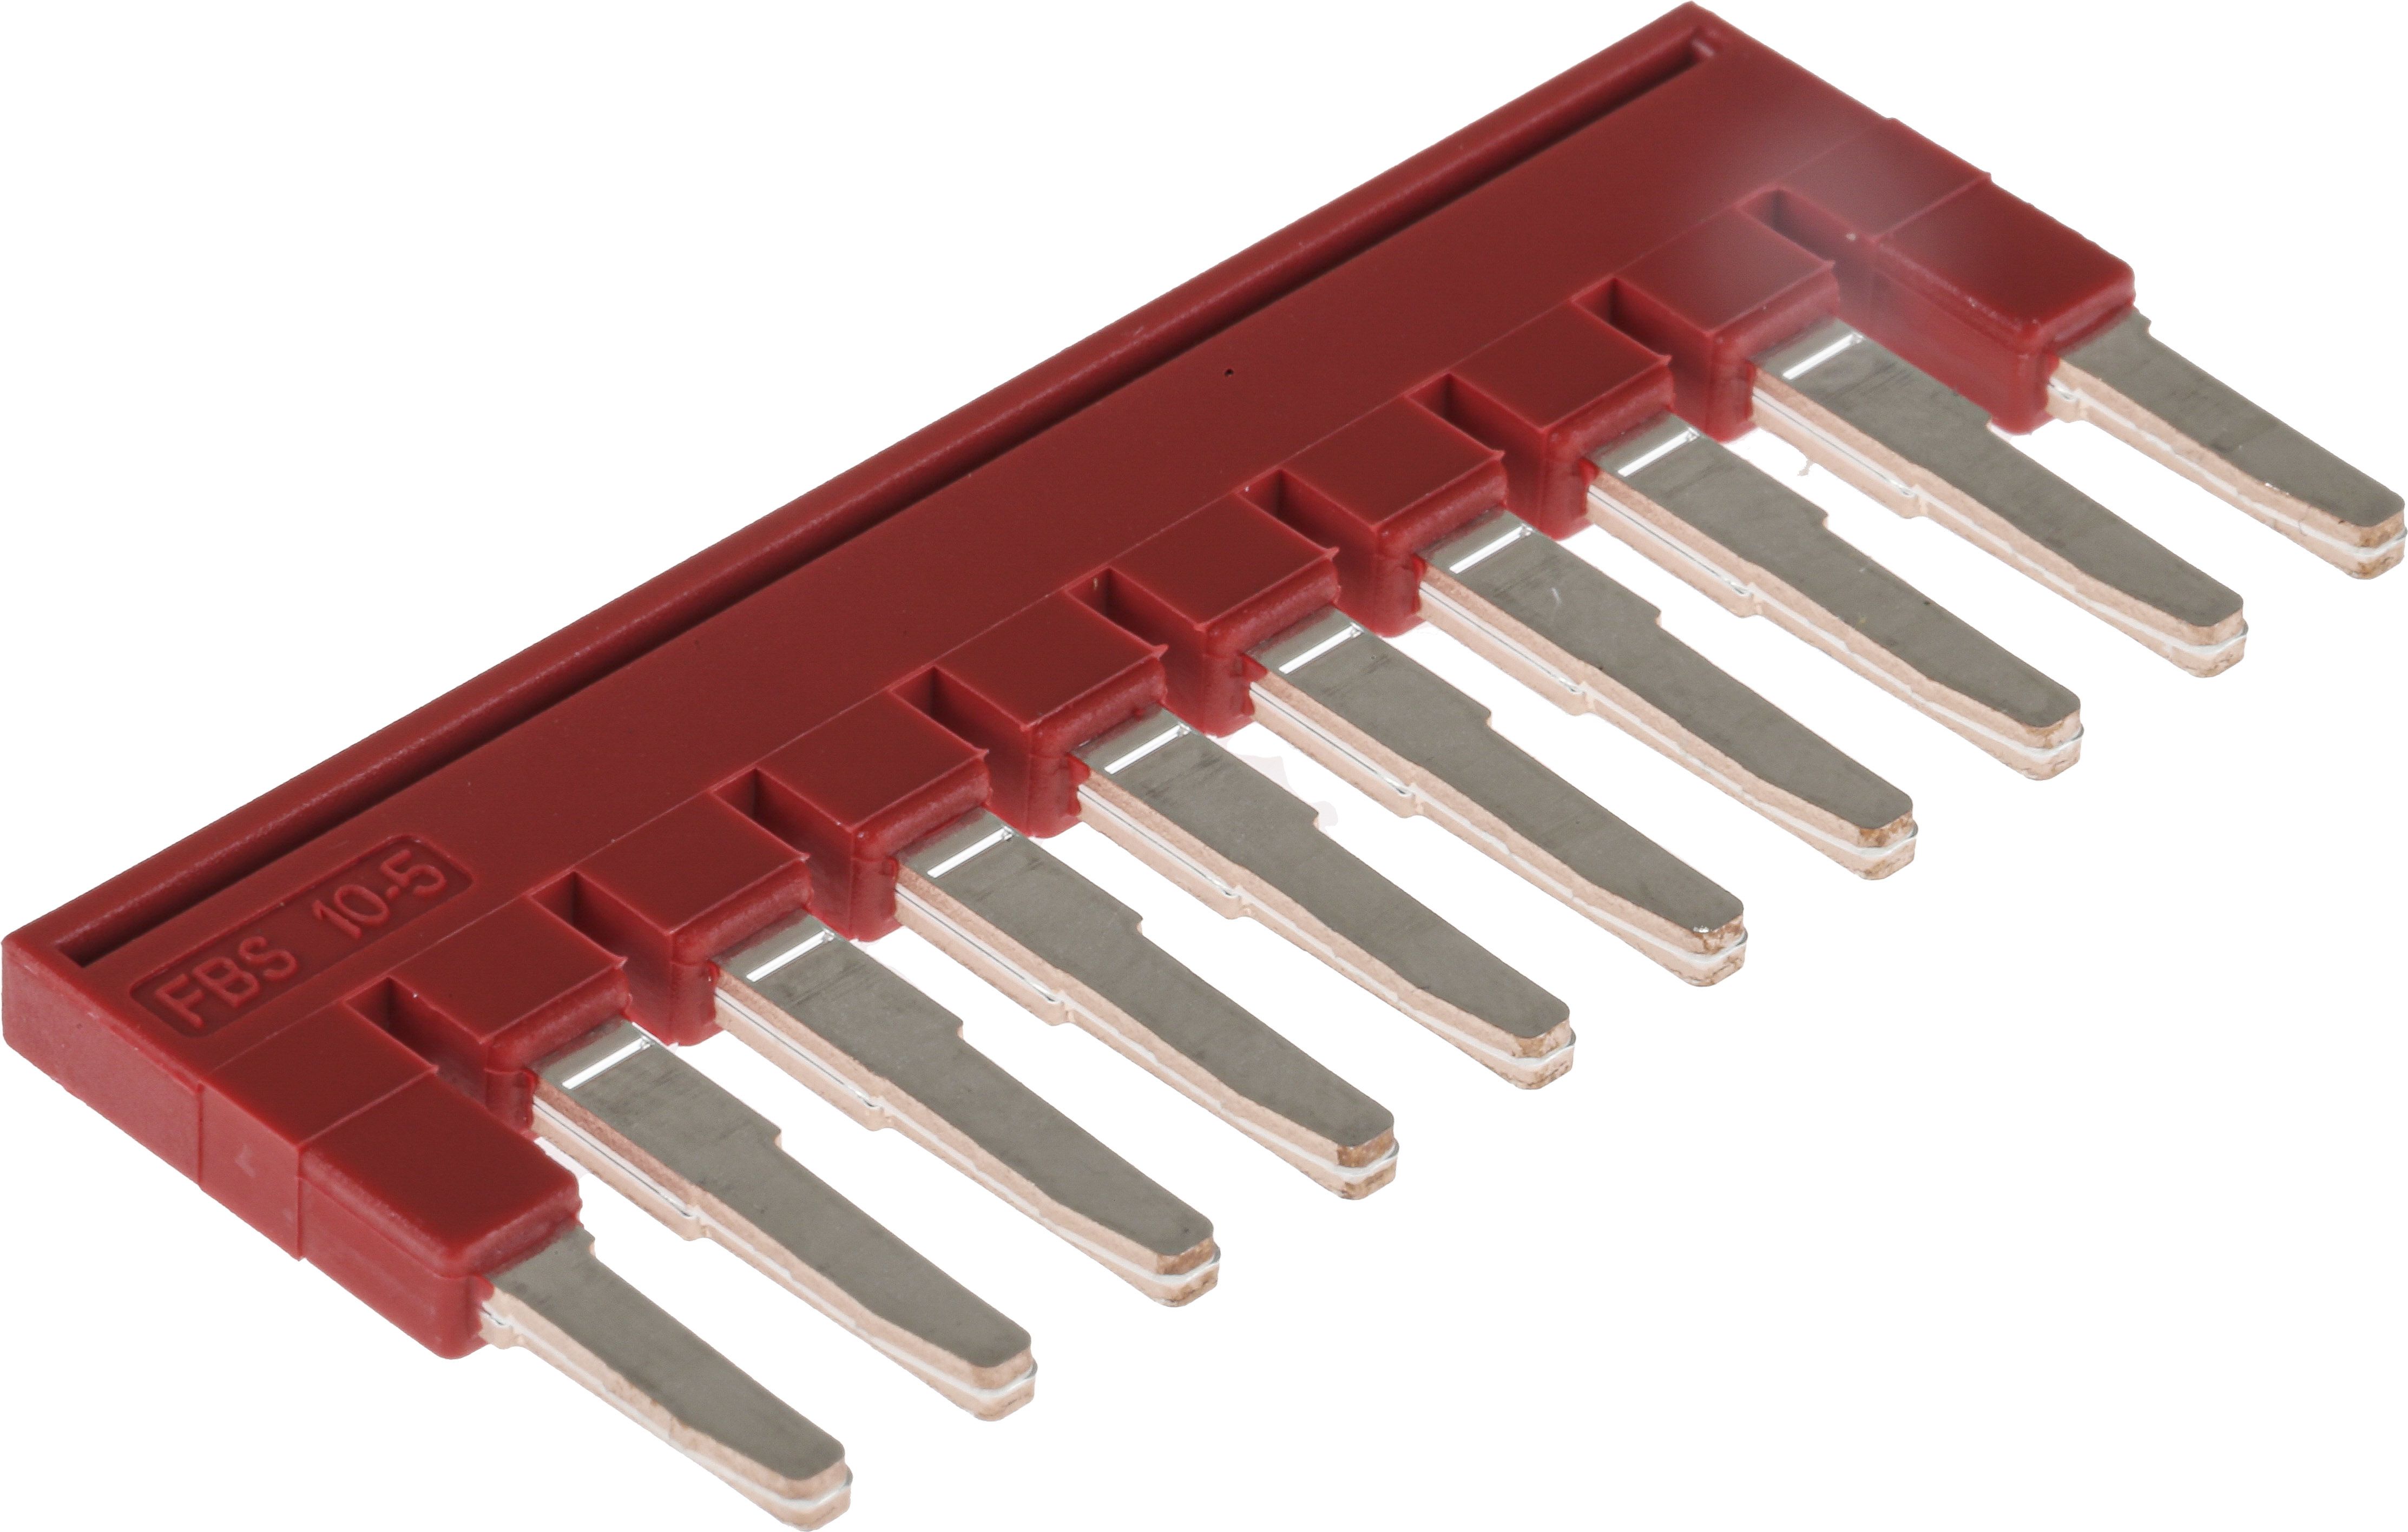 Phoenix Contact FBS 10-5 Series Jumper Bar for Use with DIN Rail Terminal Blocks